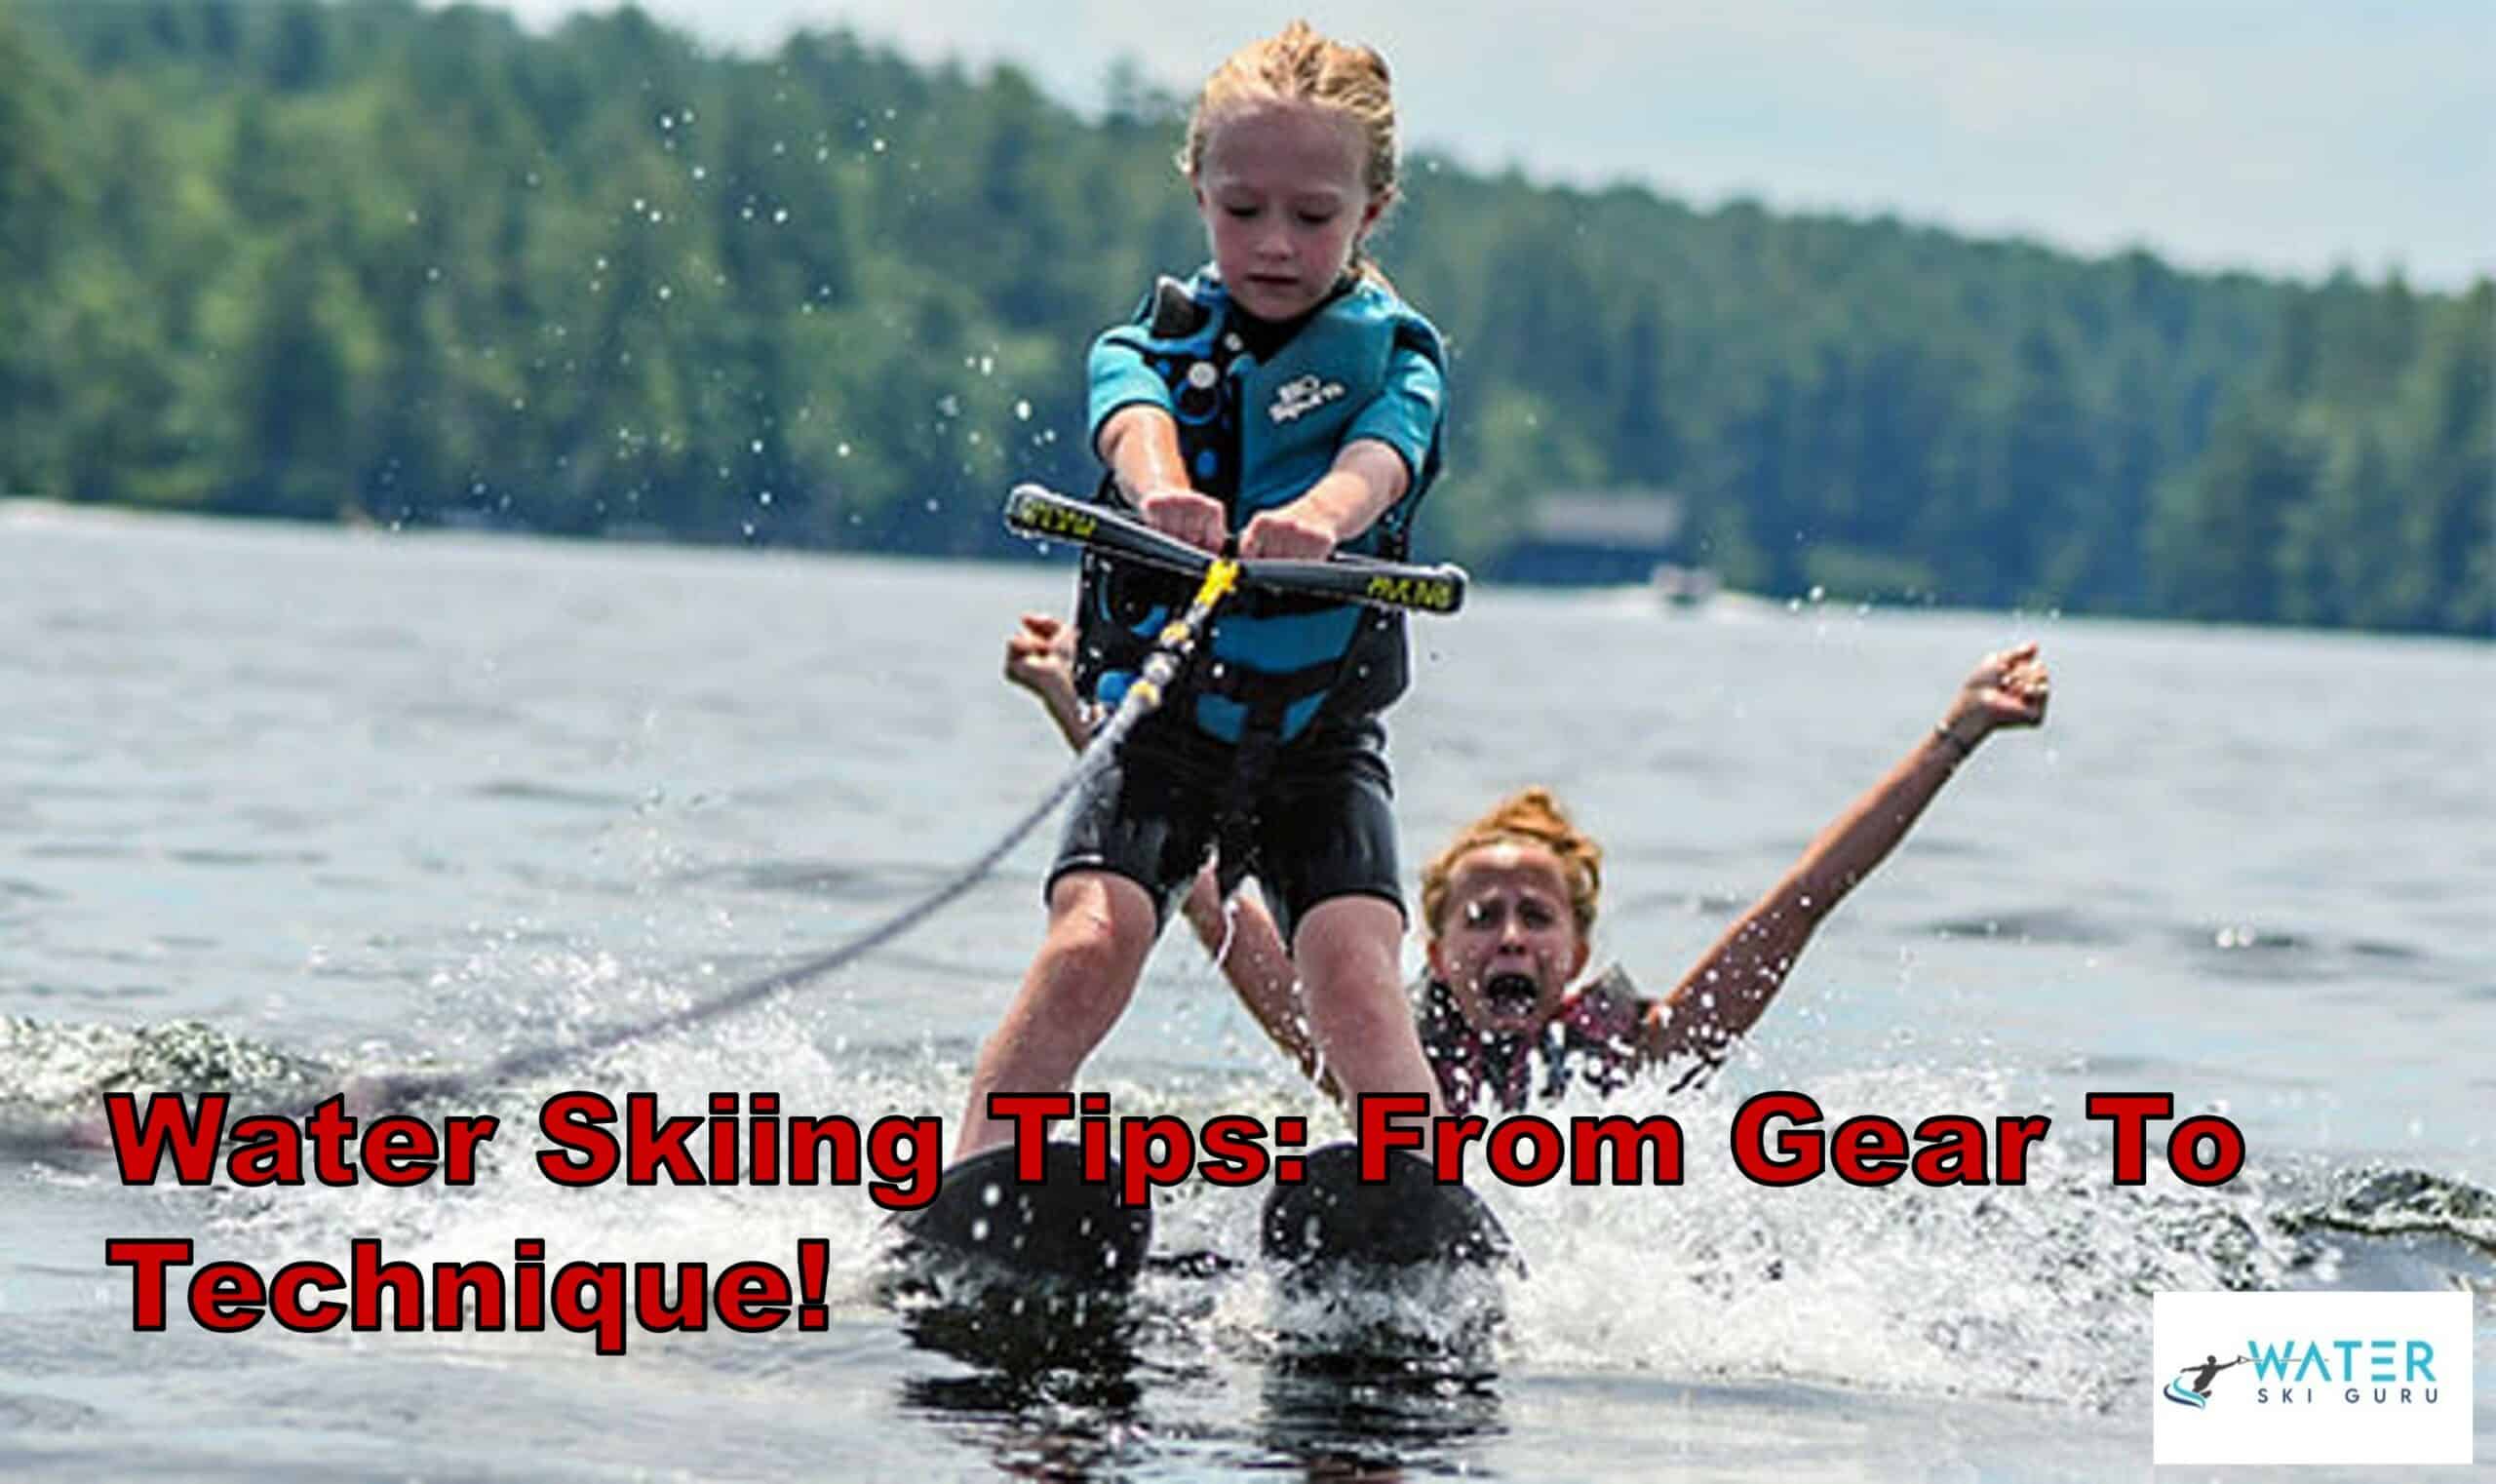 Water Skiing Tips: From Gear to Technique!